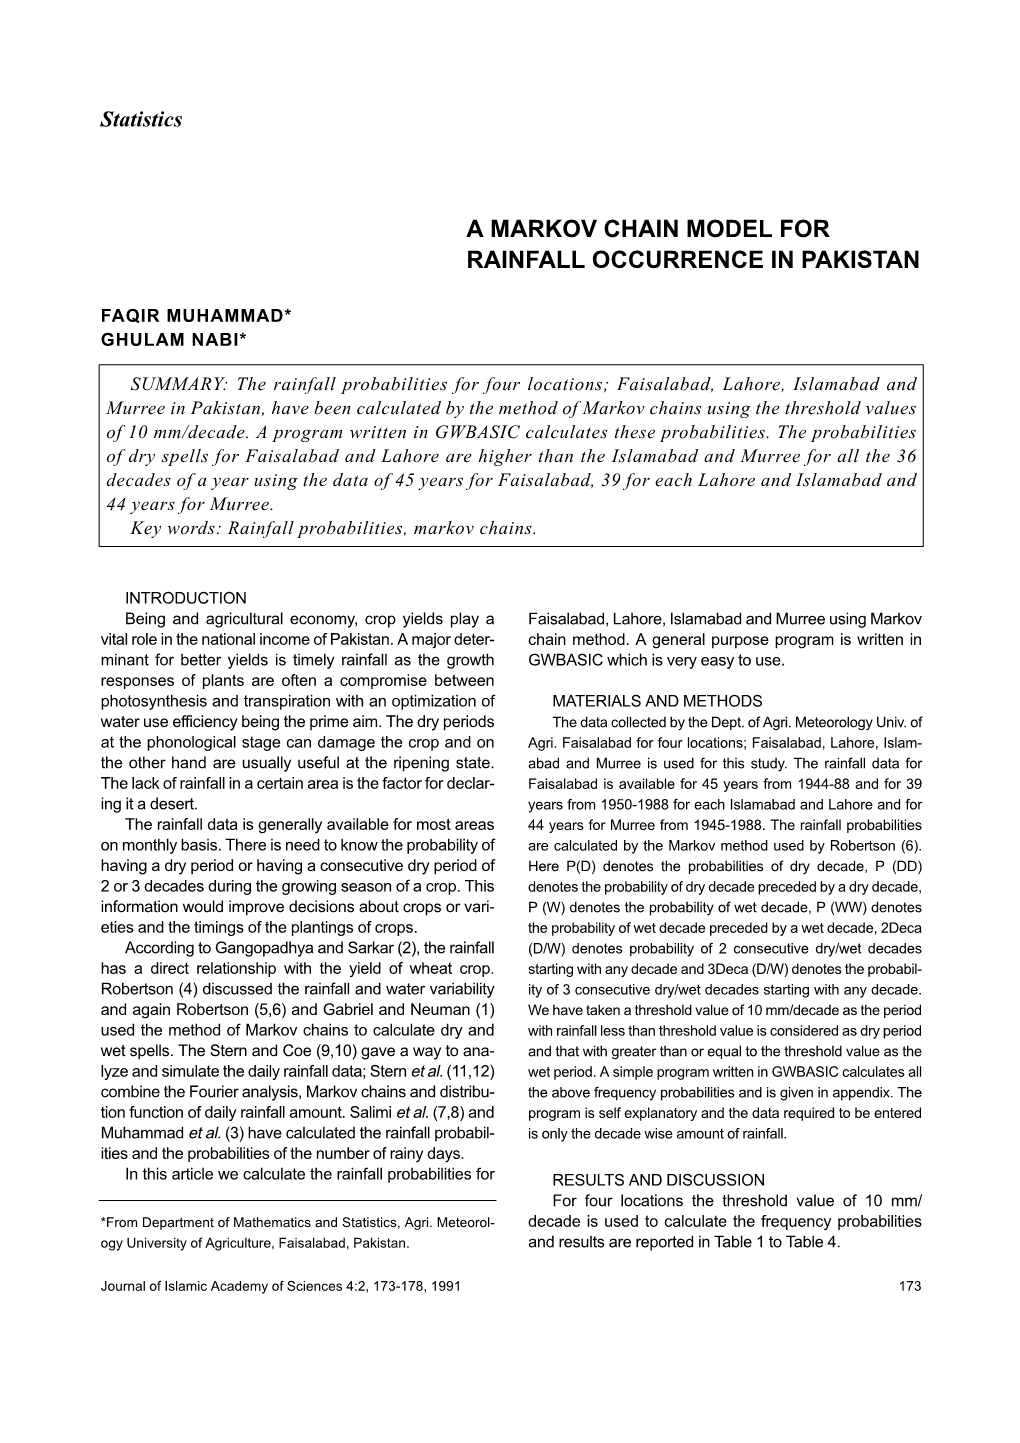 A Markov Chain Model for Rainfall Occurrence in Pakistan